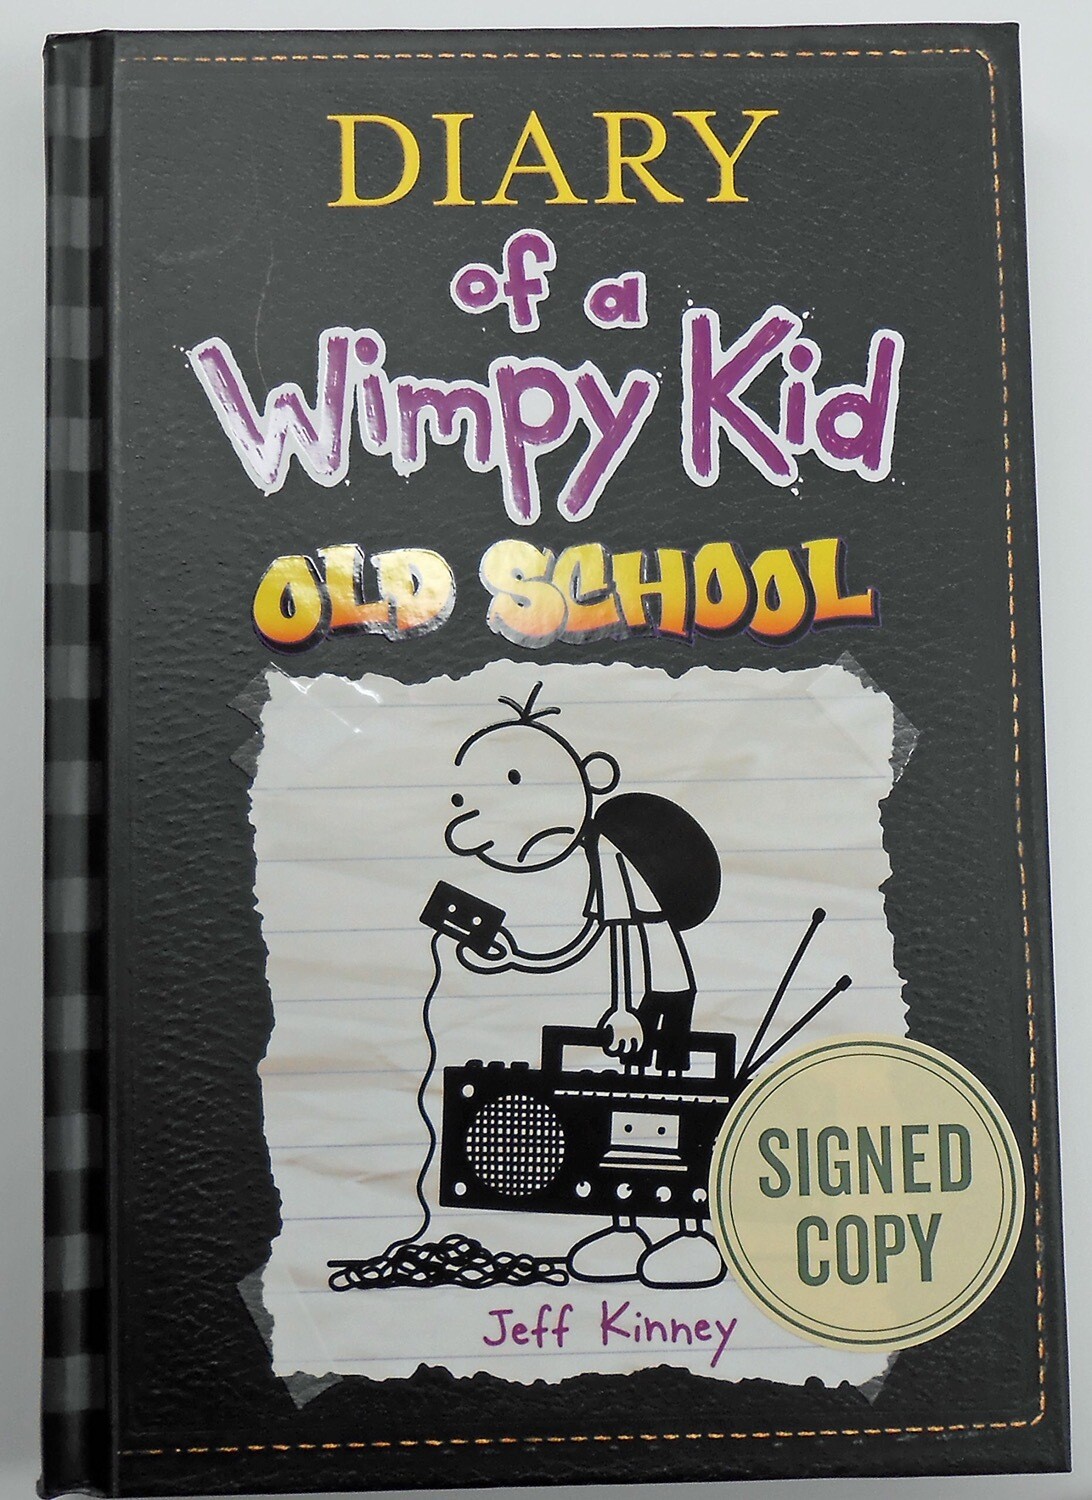 Old School (Diary of a Wimpy Kid #10) - SIGNED